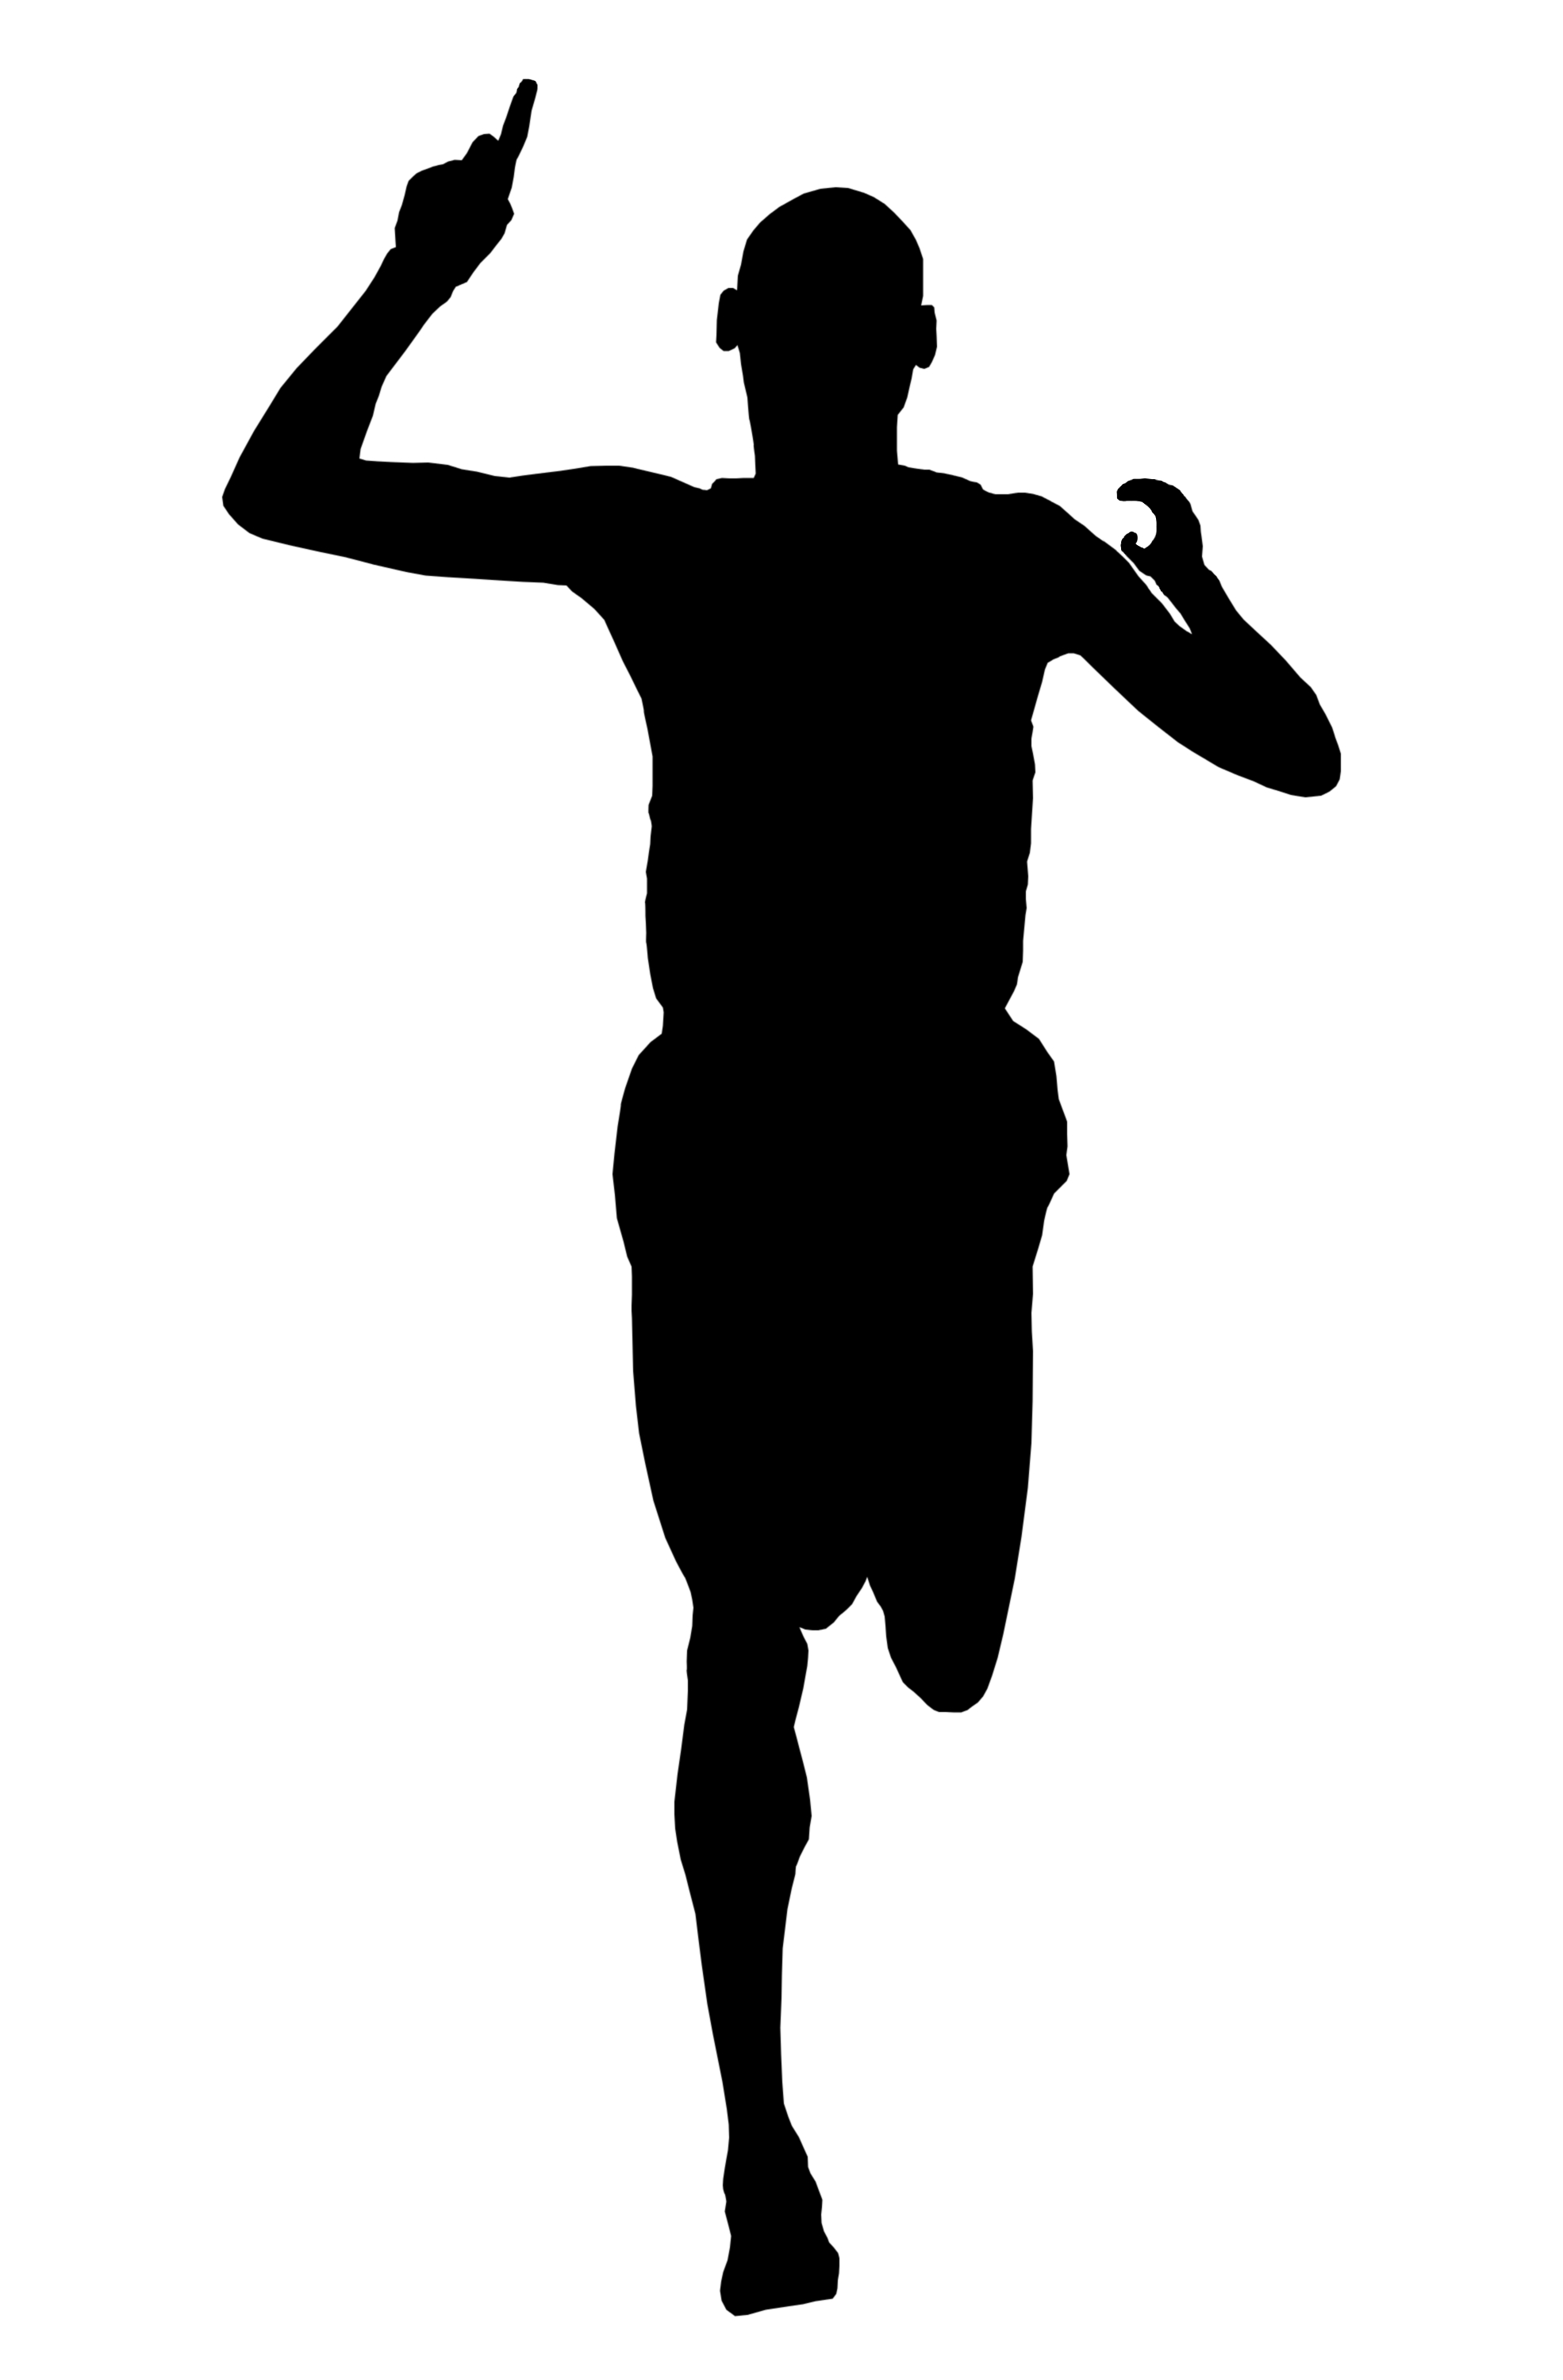 Pictures Of Runners - Clipart library